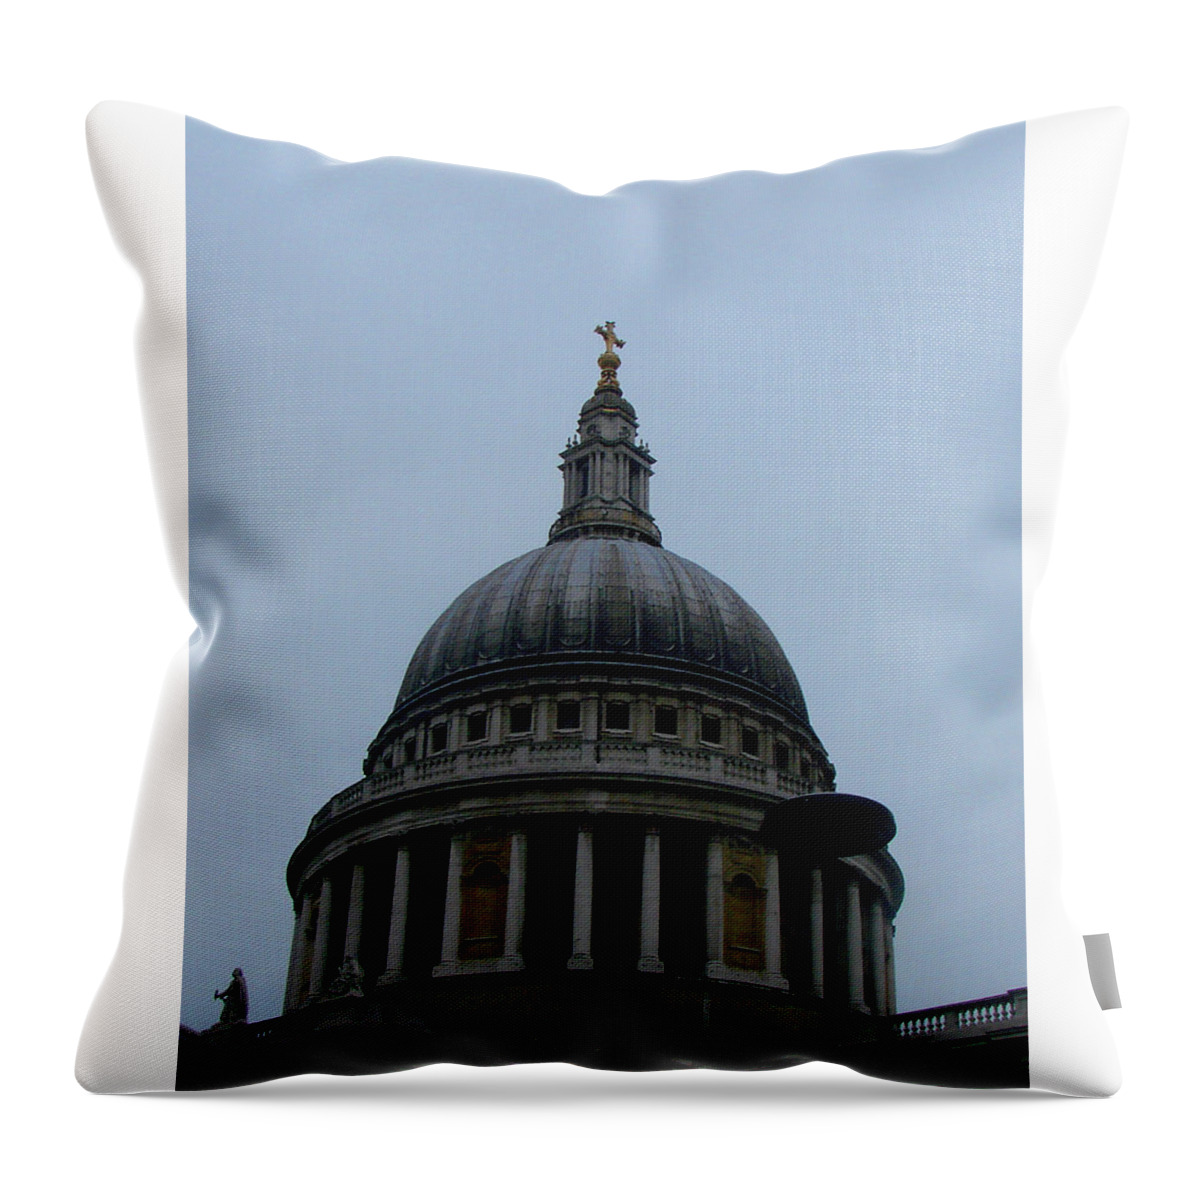 St.paul's Throw Pillow featuring the photograph St. Paul's Cathedral Dome by Misentropy